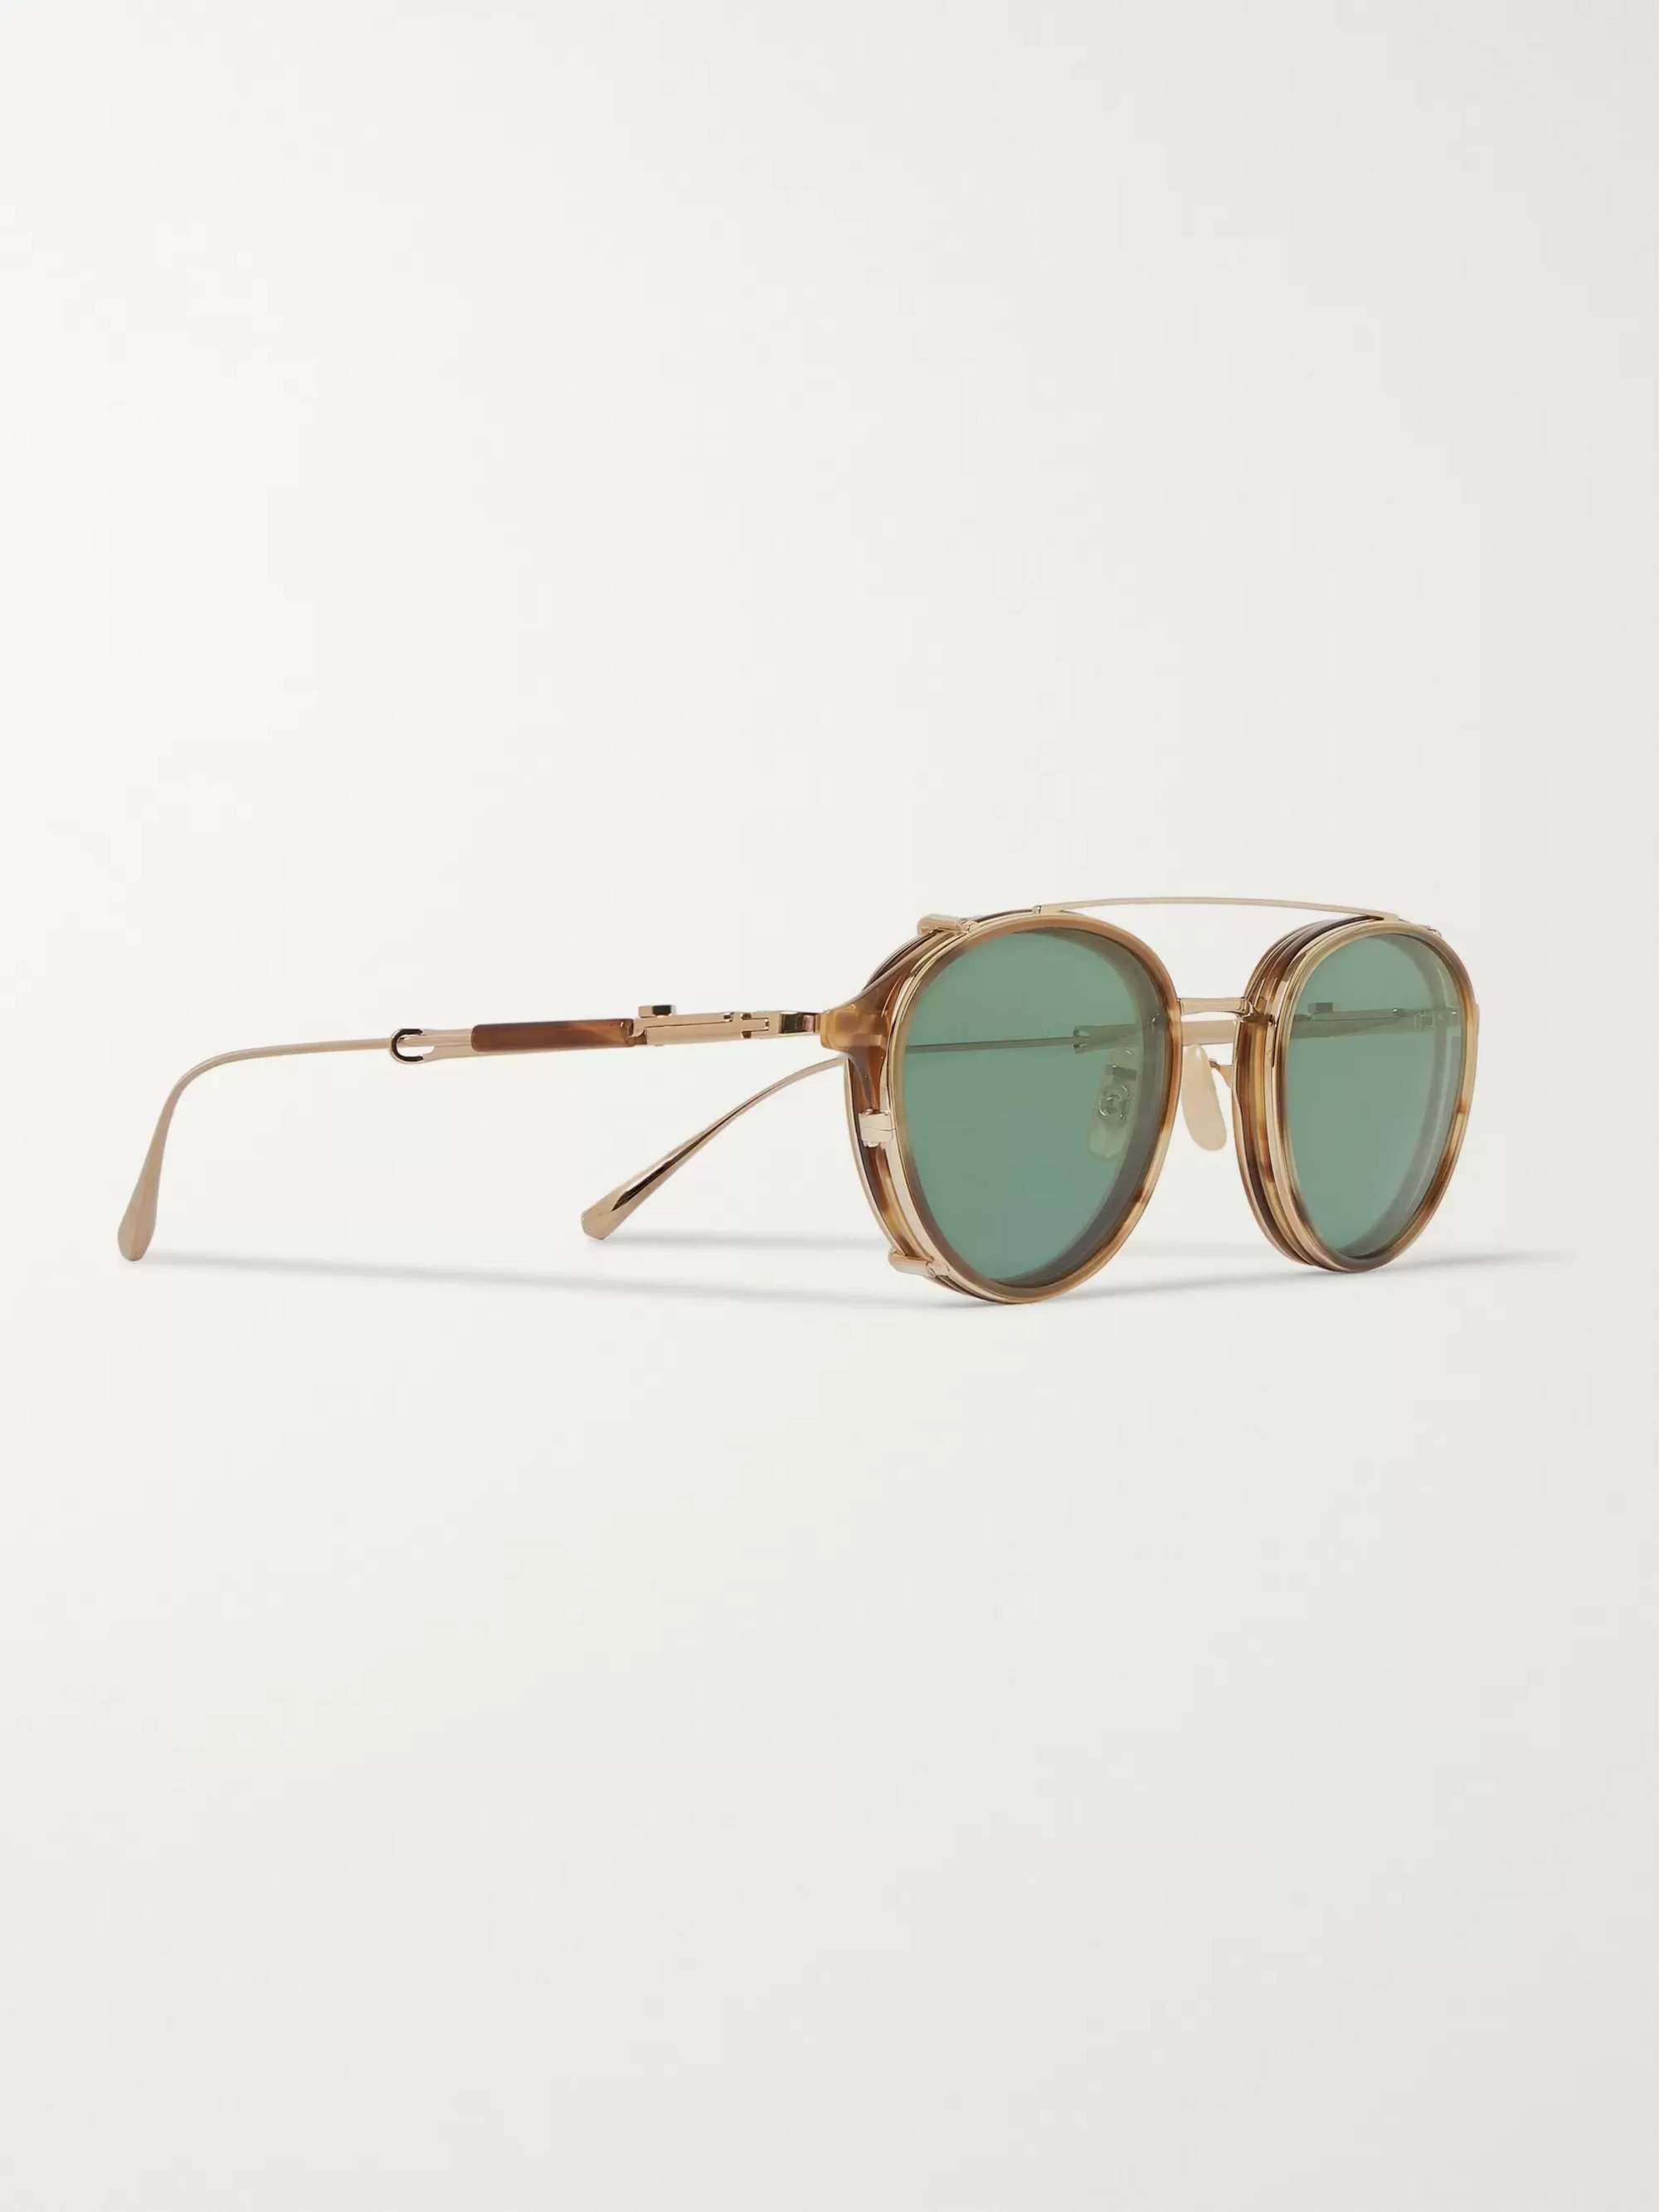 MR LEIGHT Mulholland Round-Frame 12-Karat White Gold and Acetate Glasses With Clip-On UV Lenses